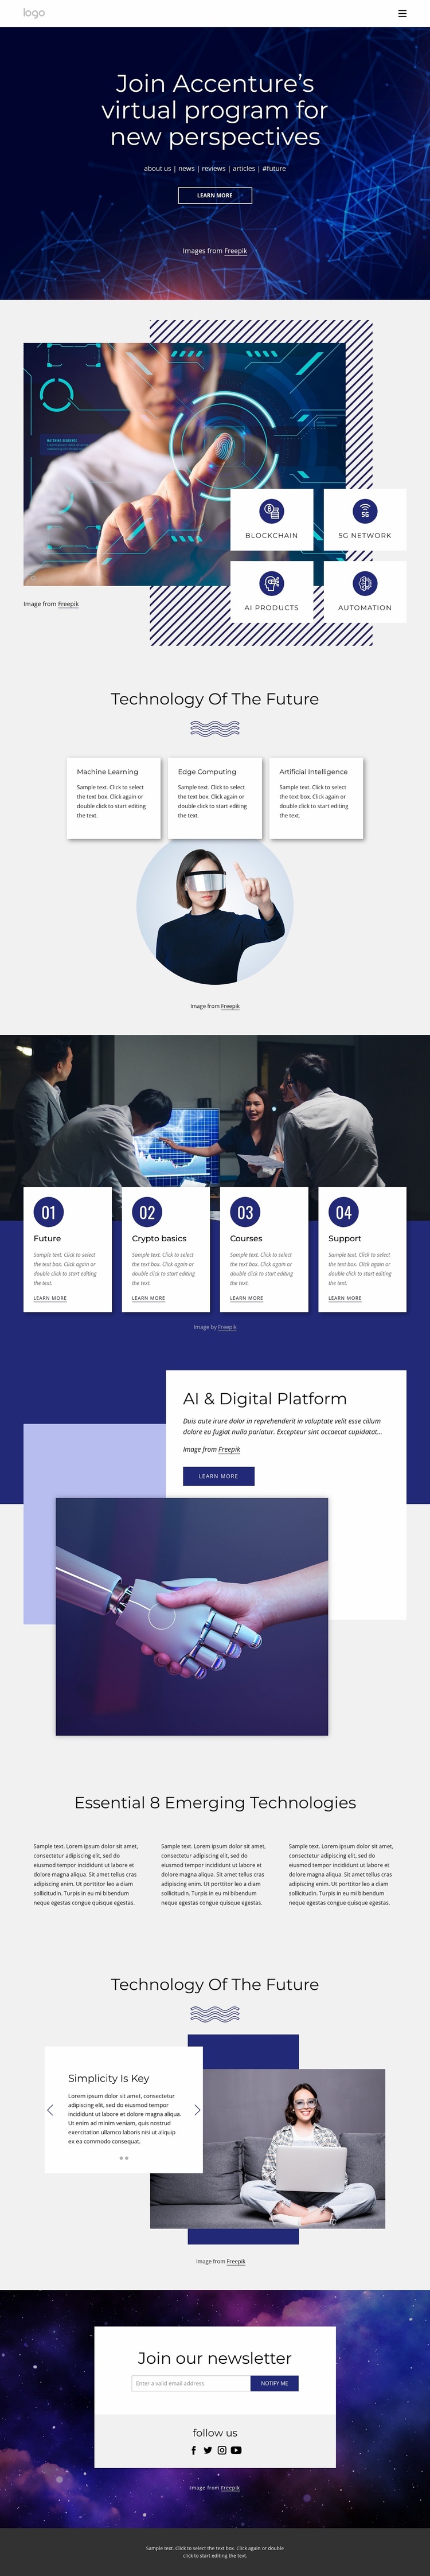 New technology perspectives Website Template